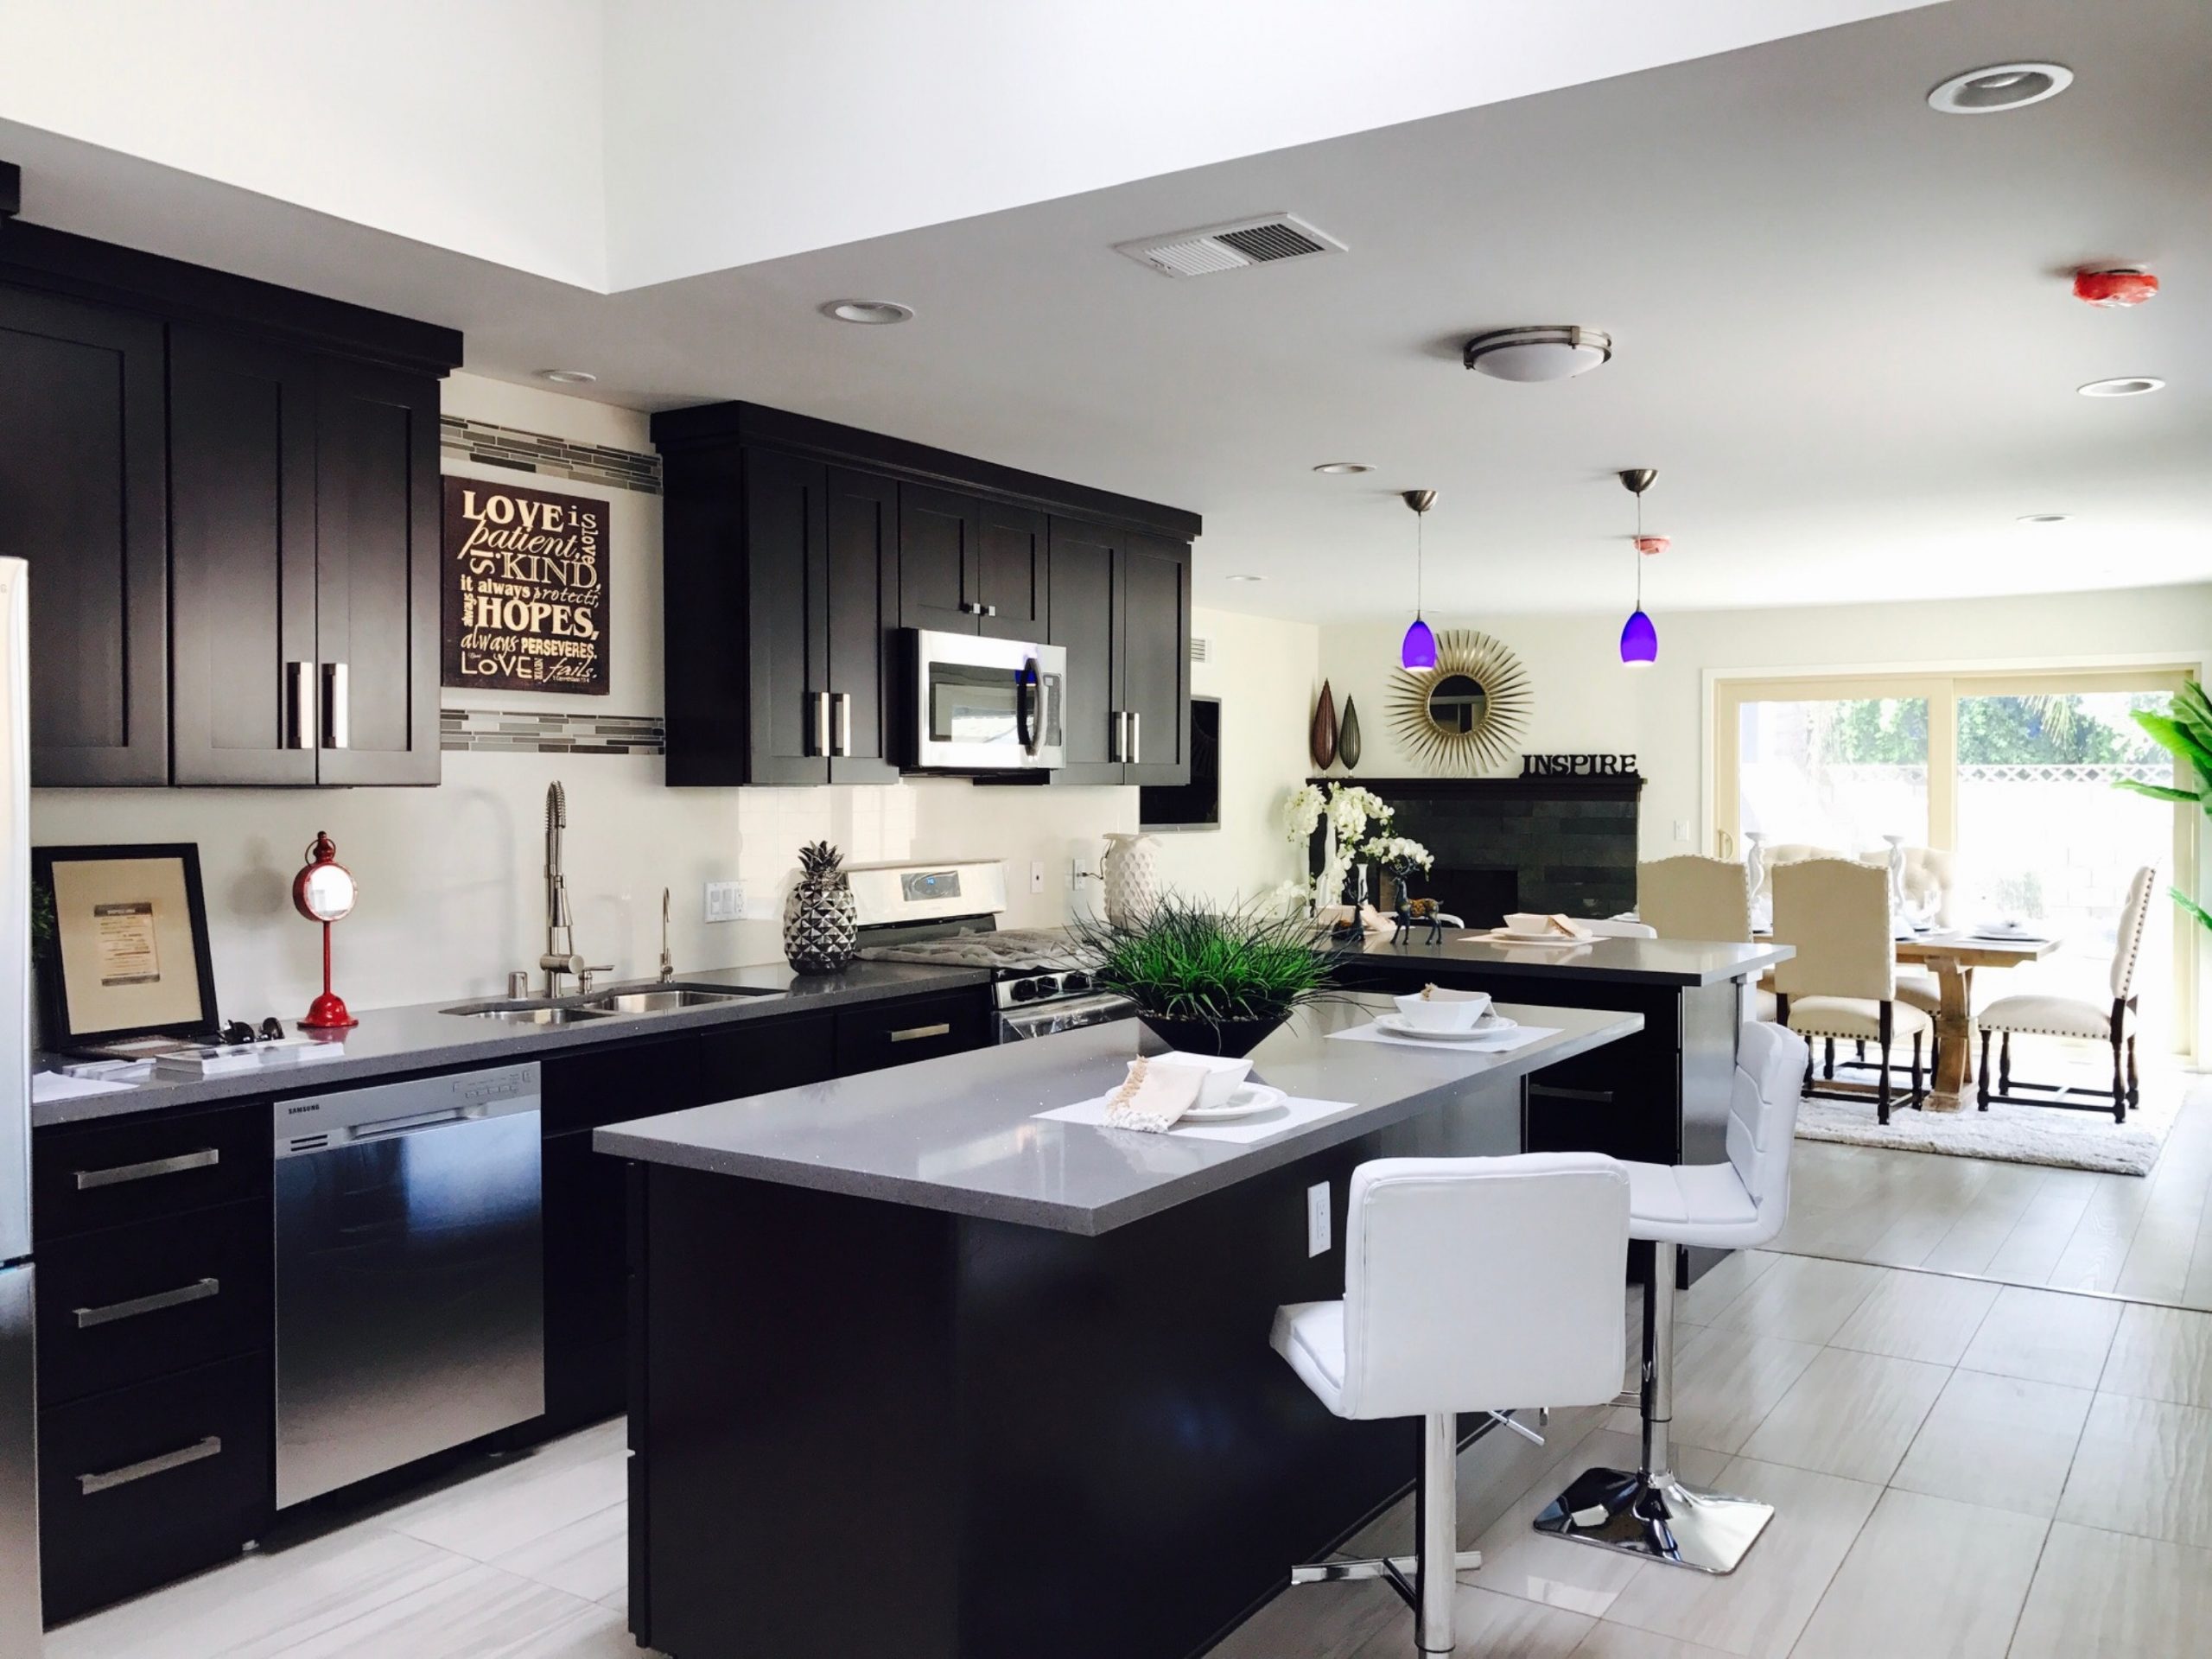 How Can You Make Your Kitchen Look Gorgeous With Black Cabinets